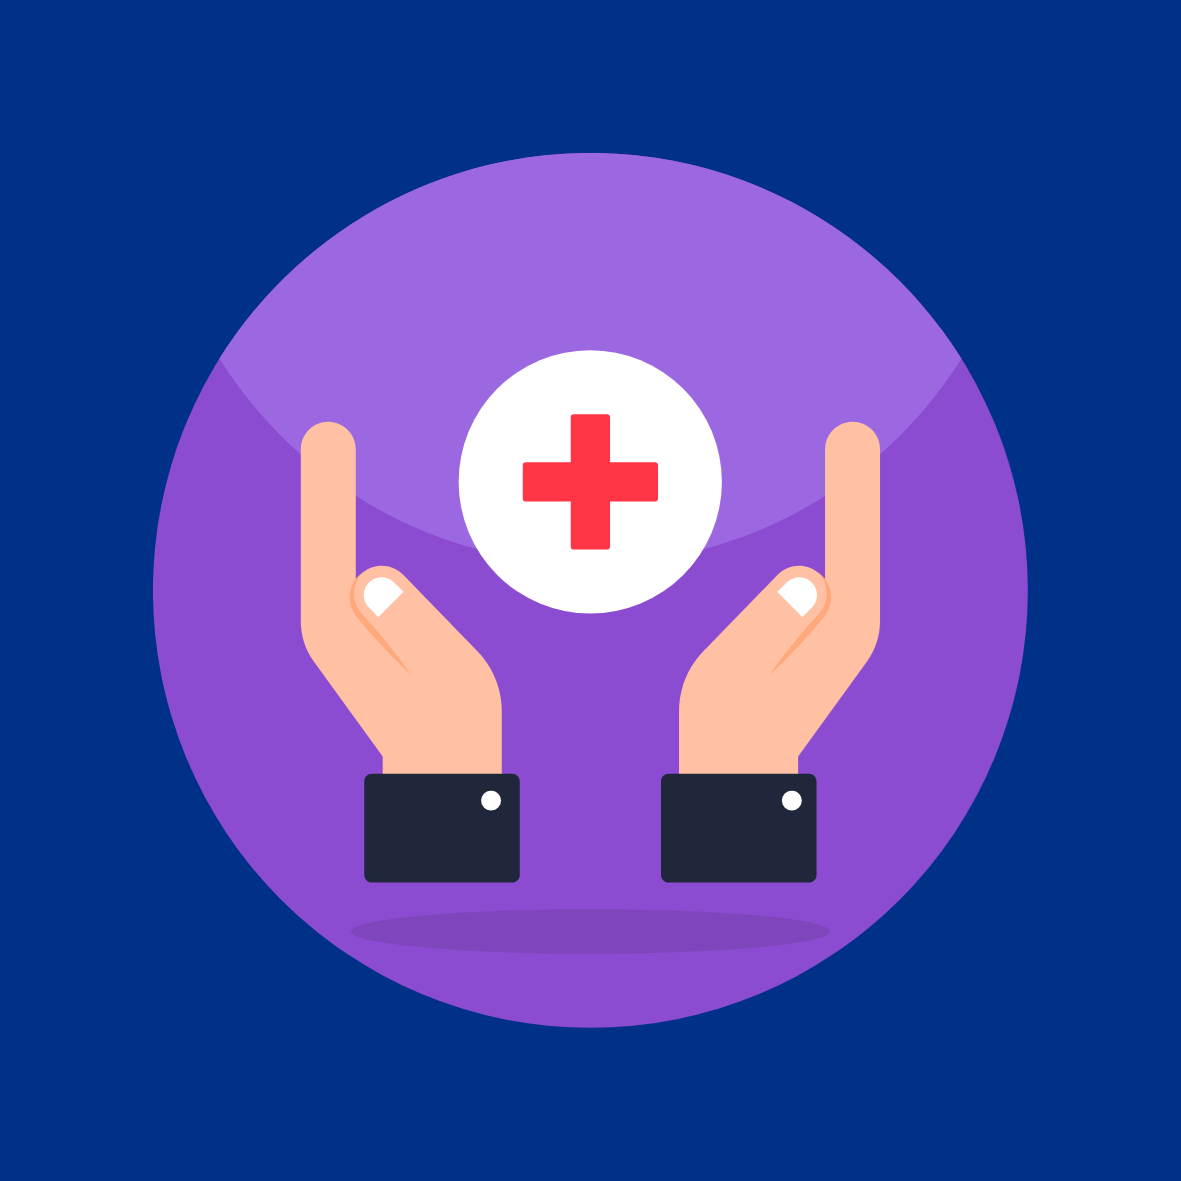 Image of Hands Holding Medical Red Cross to Depict Self-Care